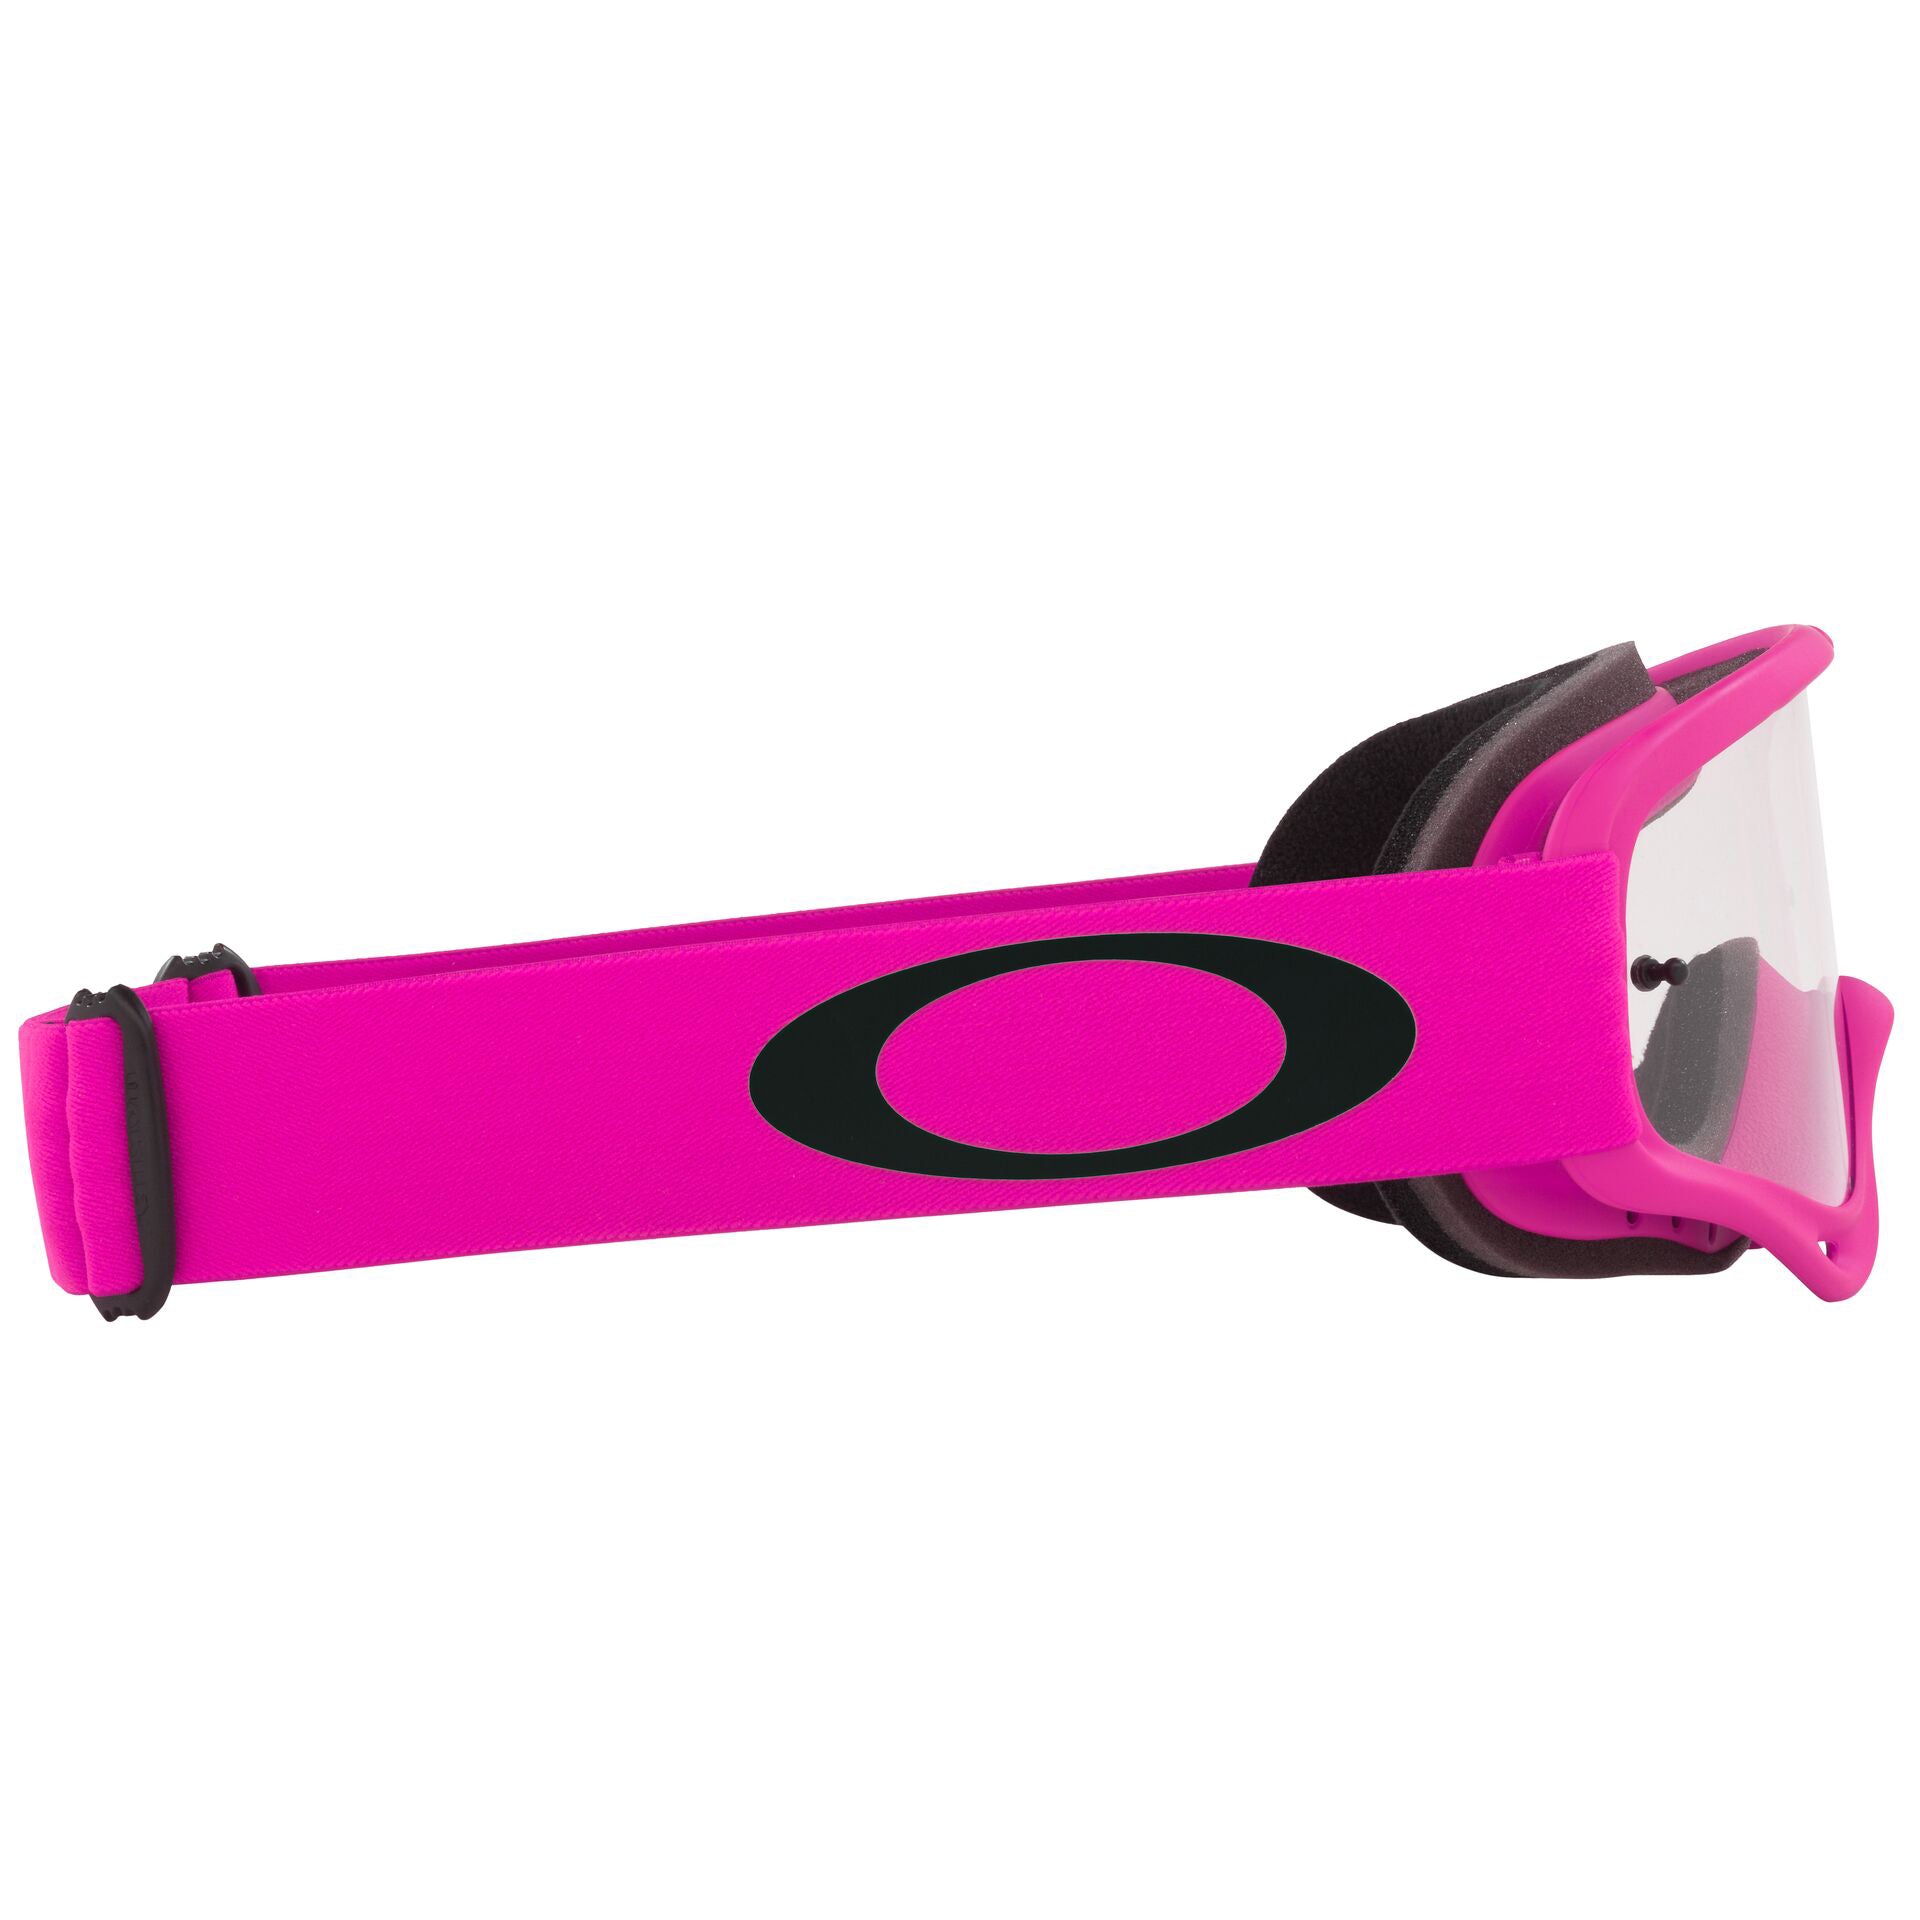 Oakley O Frame XS MX Goggle Moto Pink - Clear Lens